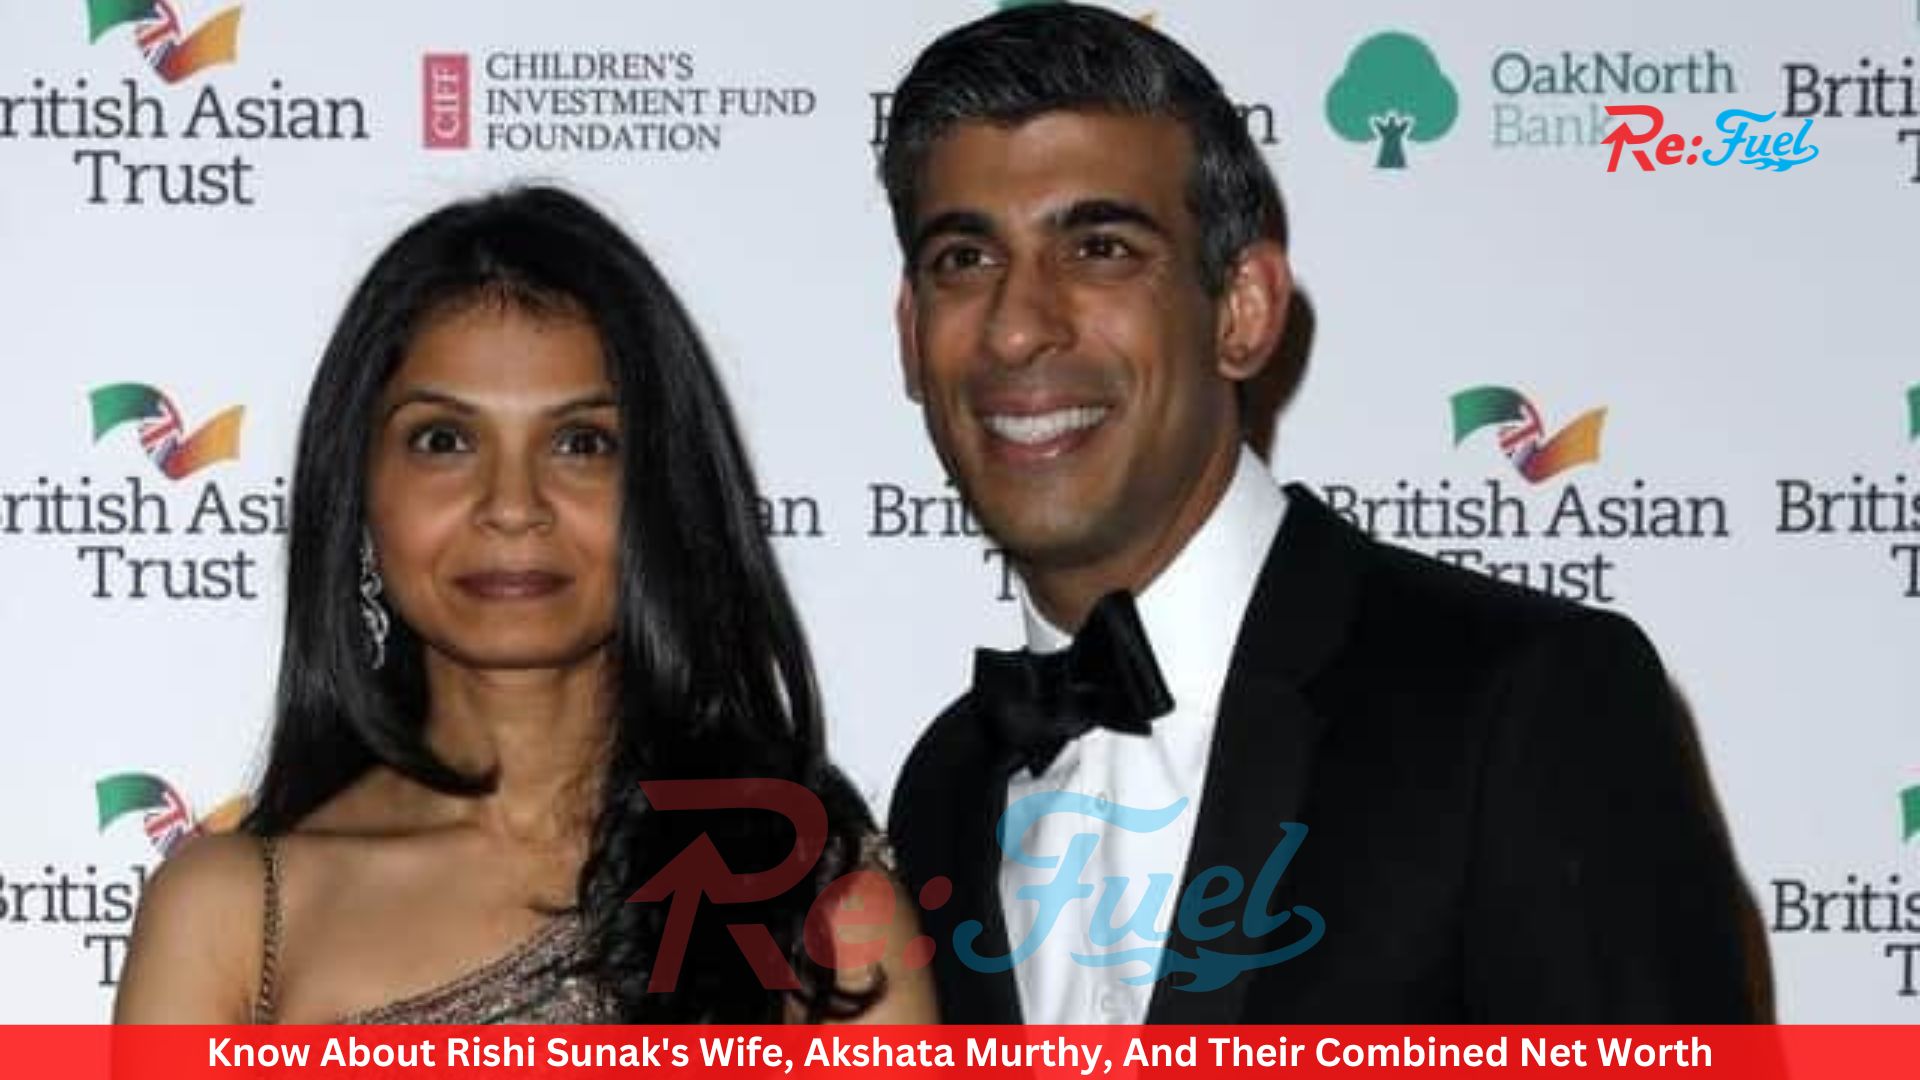 Know About Rishi Sunak's Wife, Akshata Murthy, And Their Combined Net Worth